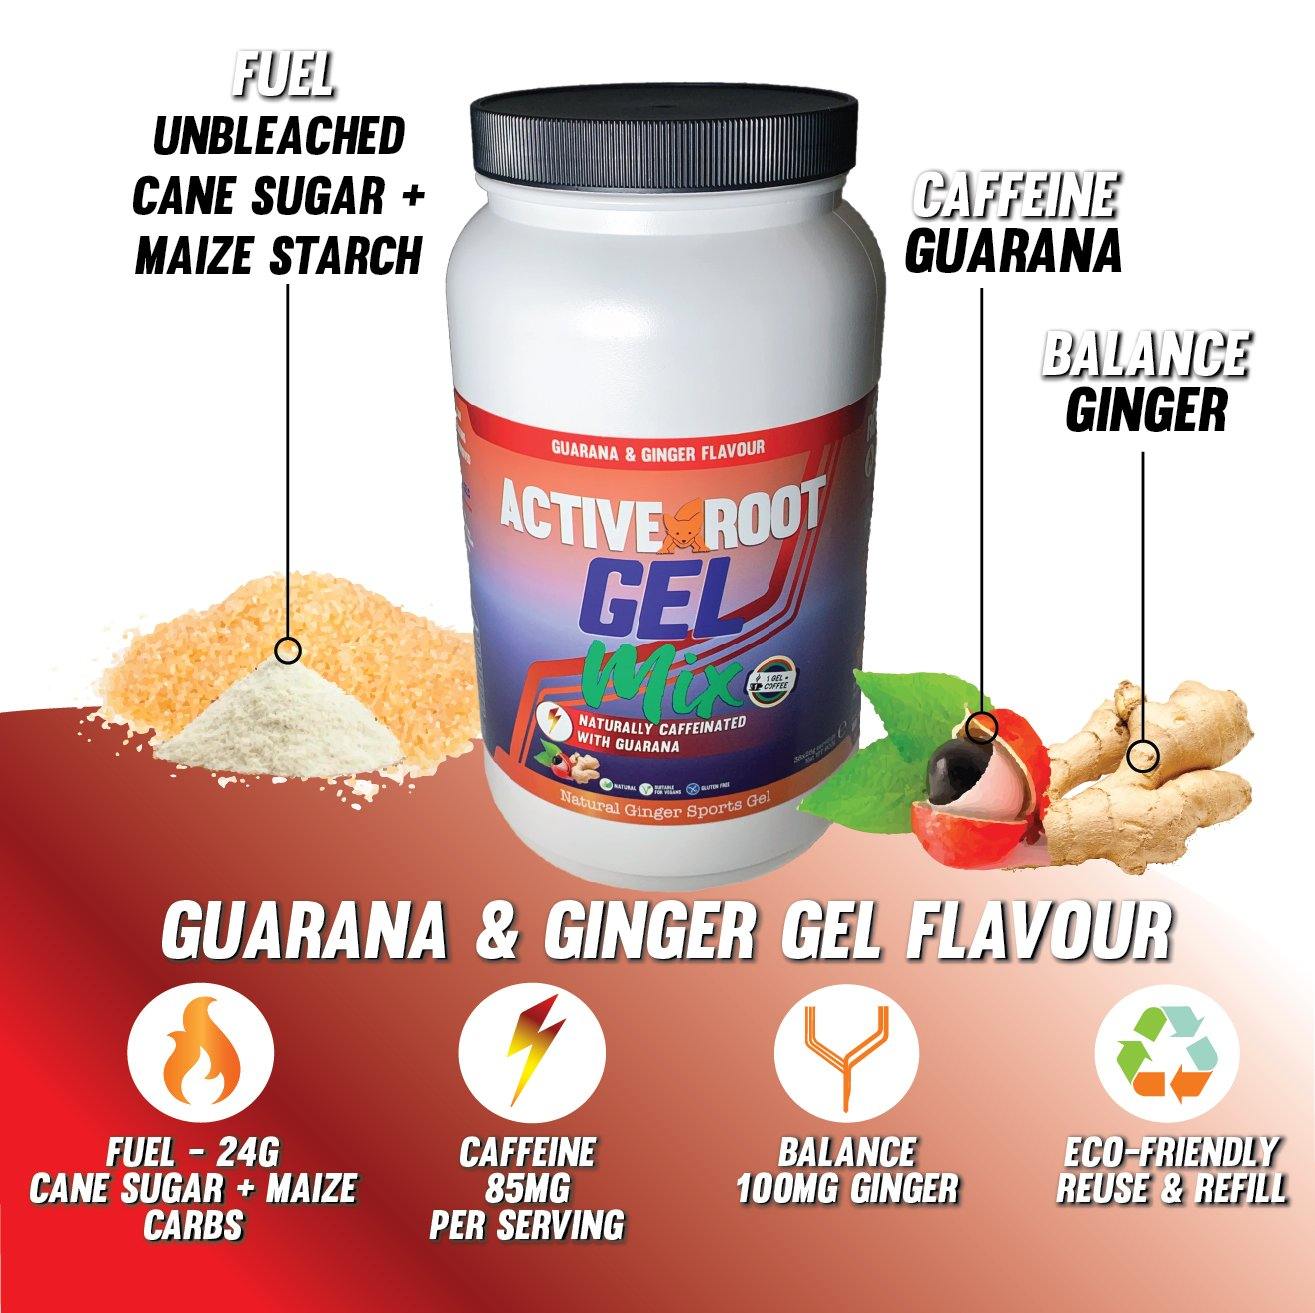 Guarana 900g Caffeinated Gel Mix Tub - (36 servings) - Active Root